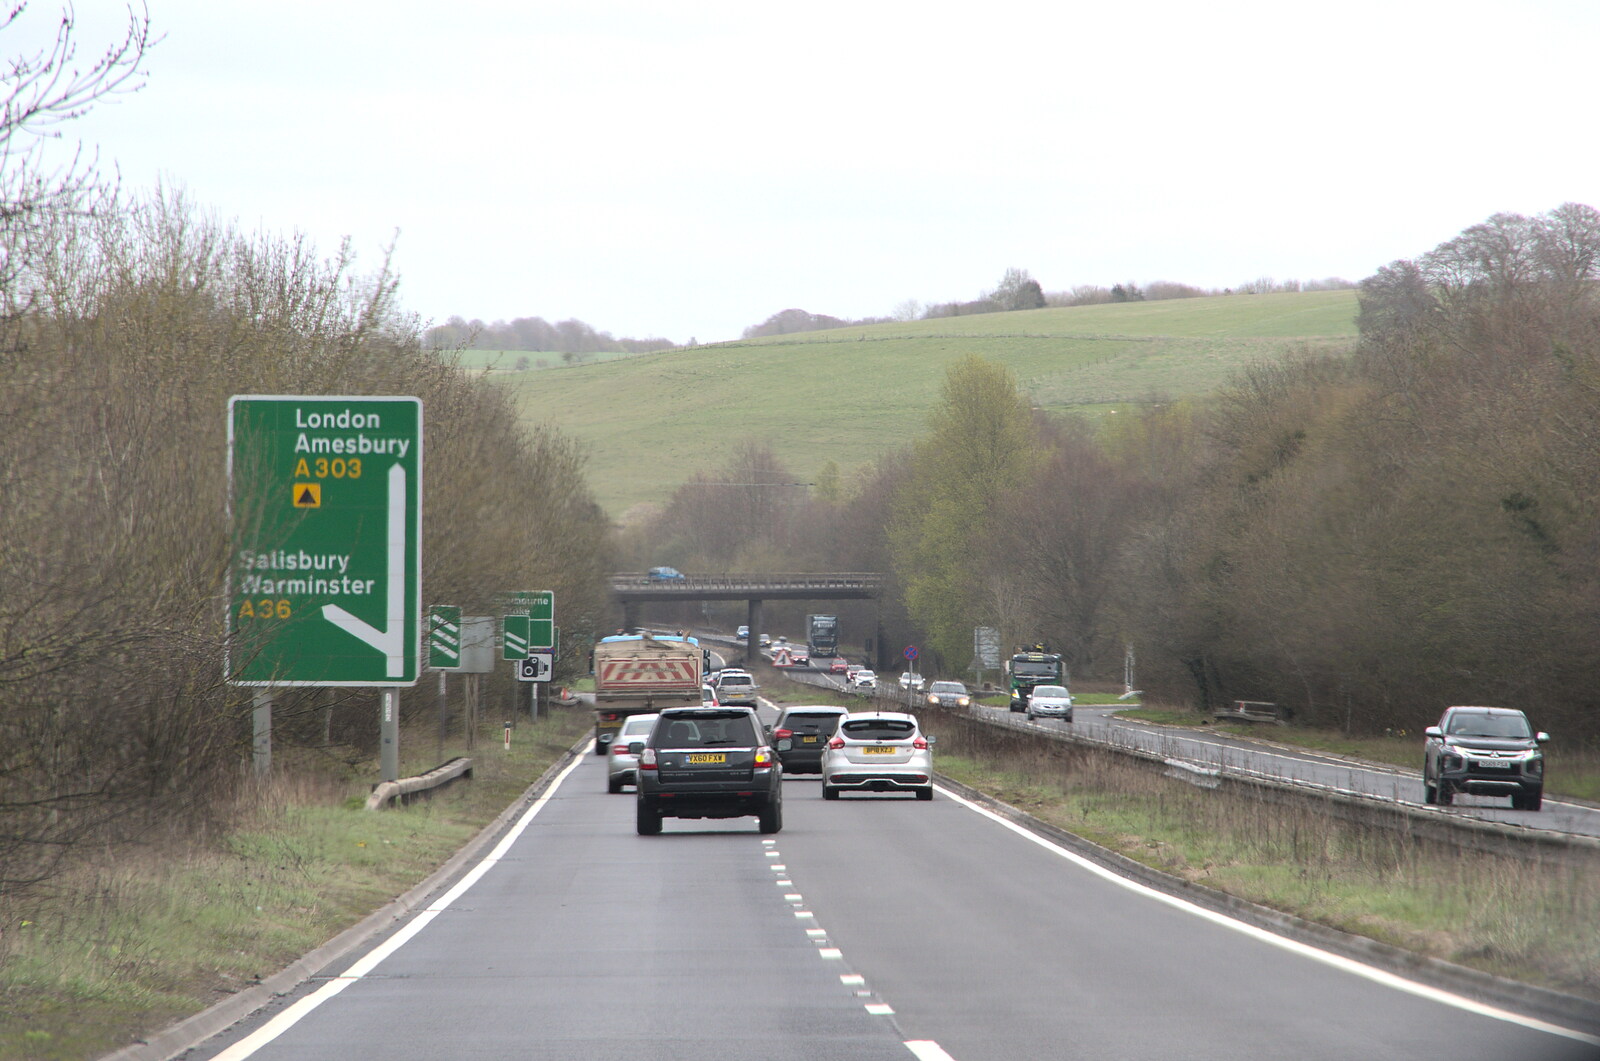 Fred's photo of the A303 from Chilli Farms, Okehampton and the Oxenham Arms, South Zeal, Devon - 10th April 2023